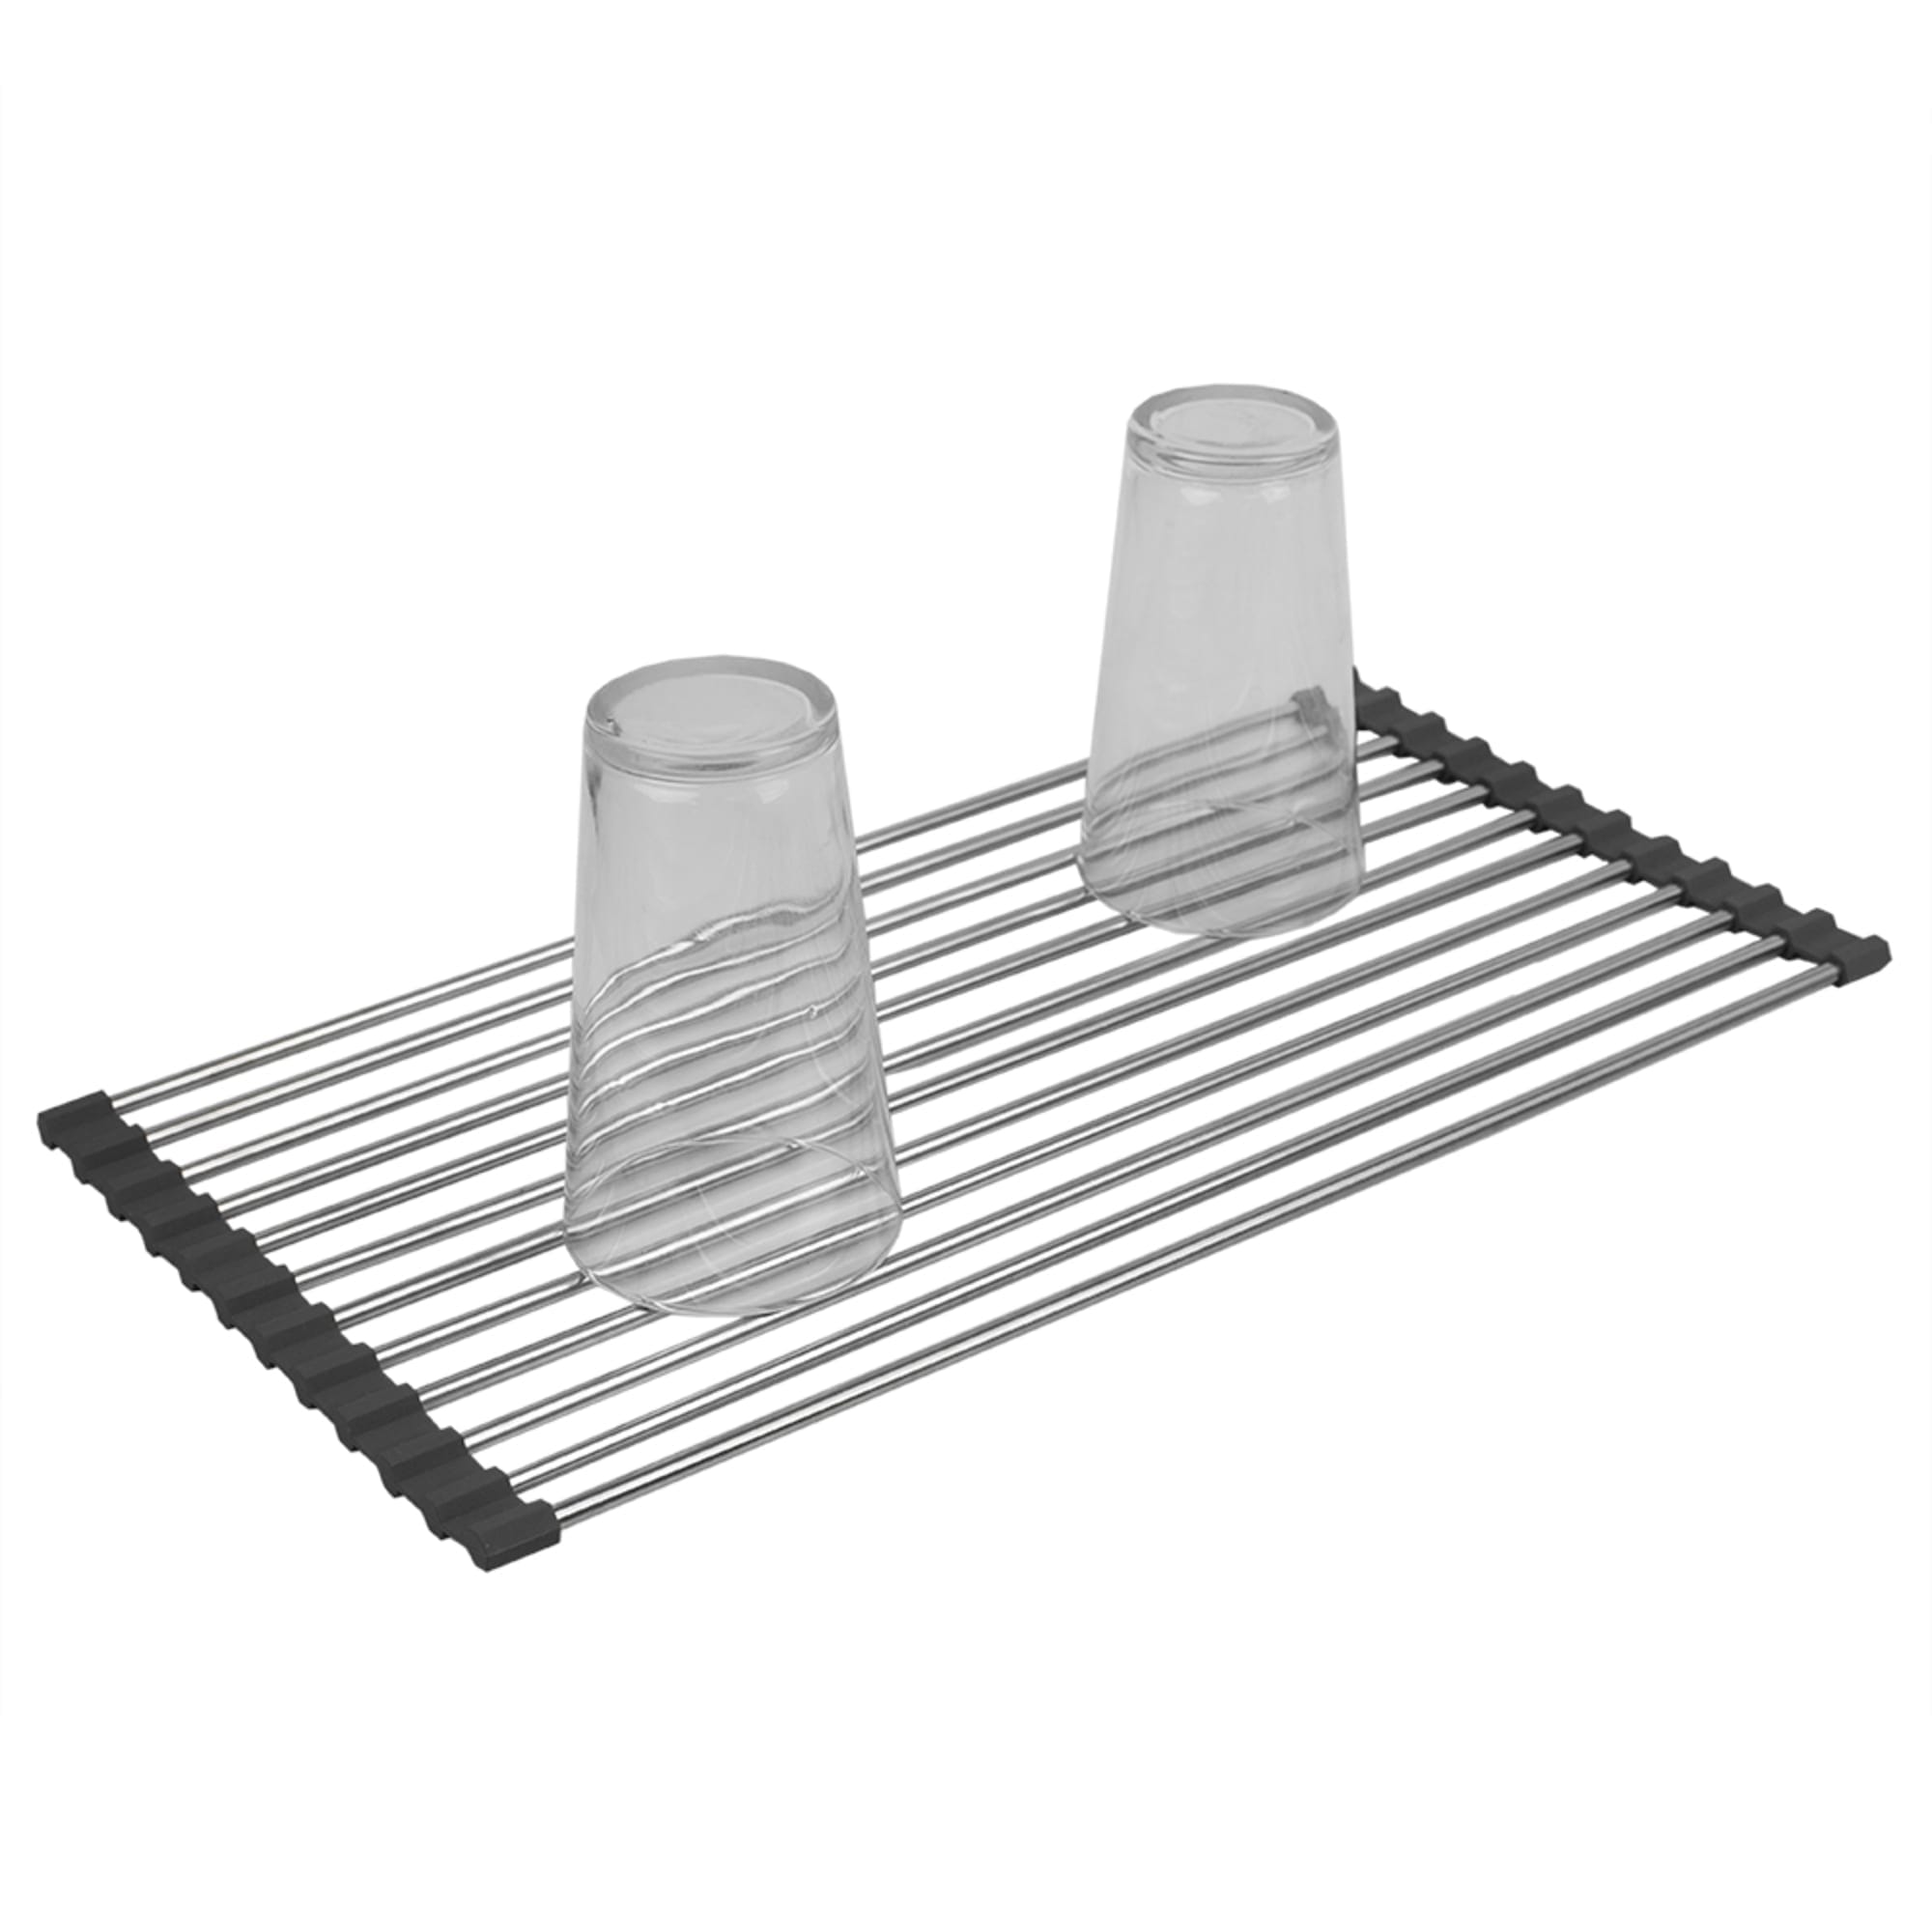 Buy Wholesale China High Quality Silver Chrome Plated Dish Drainer